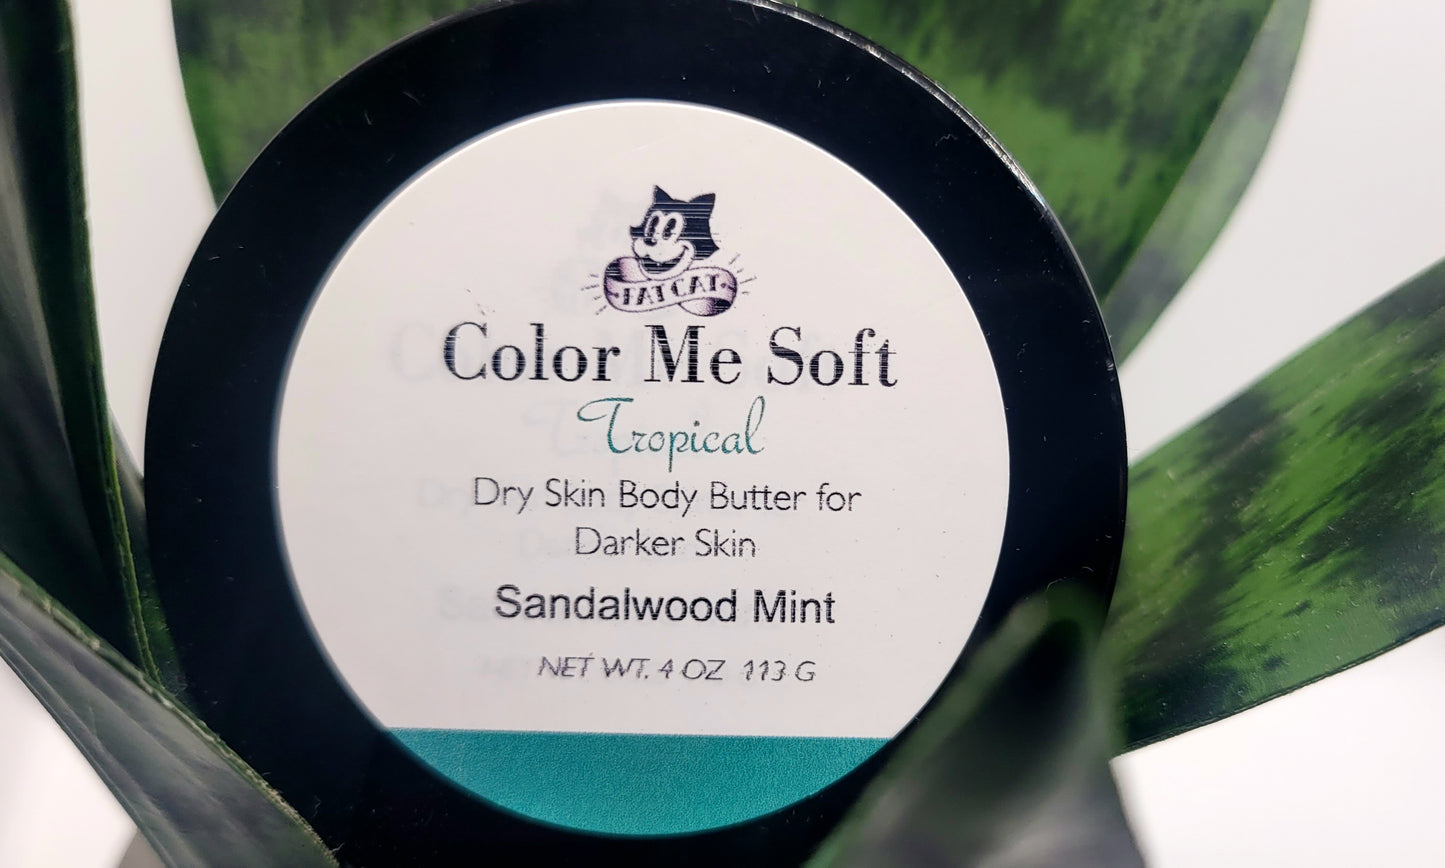 Tropical Color Me Soft Dry Skin Body Butter